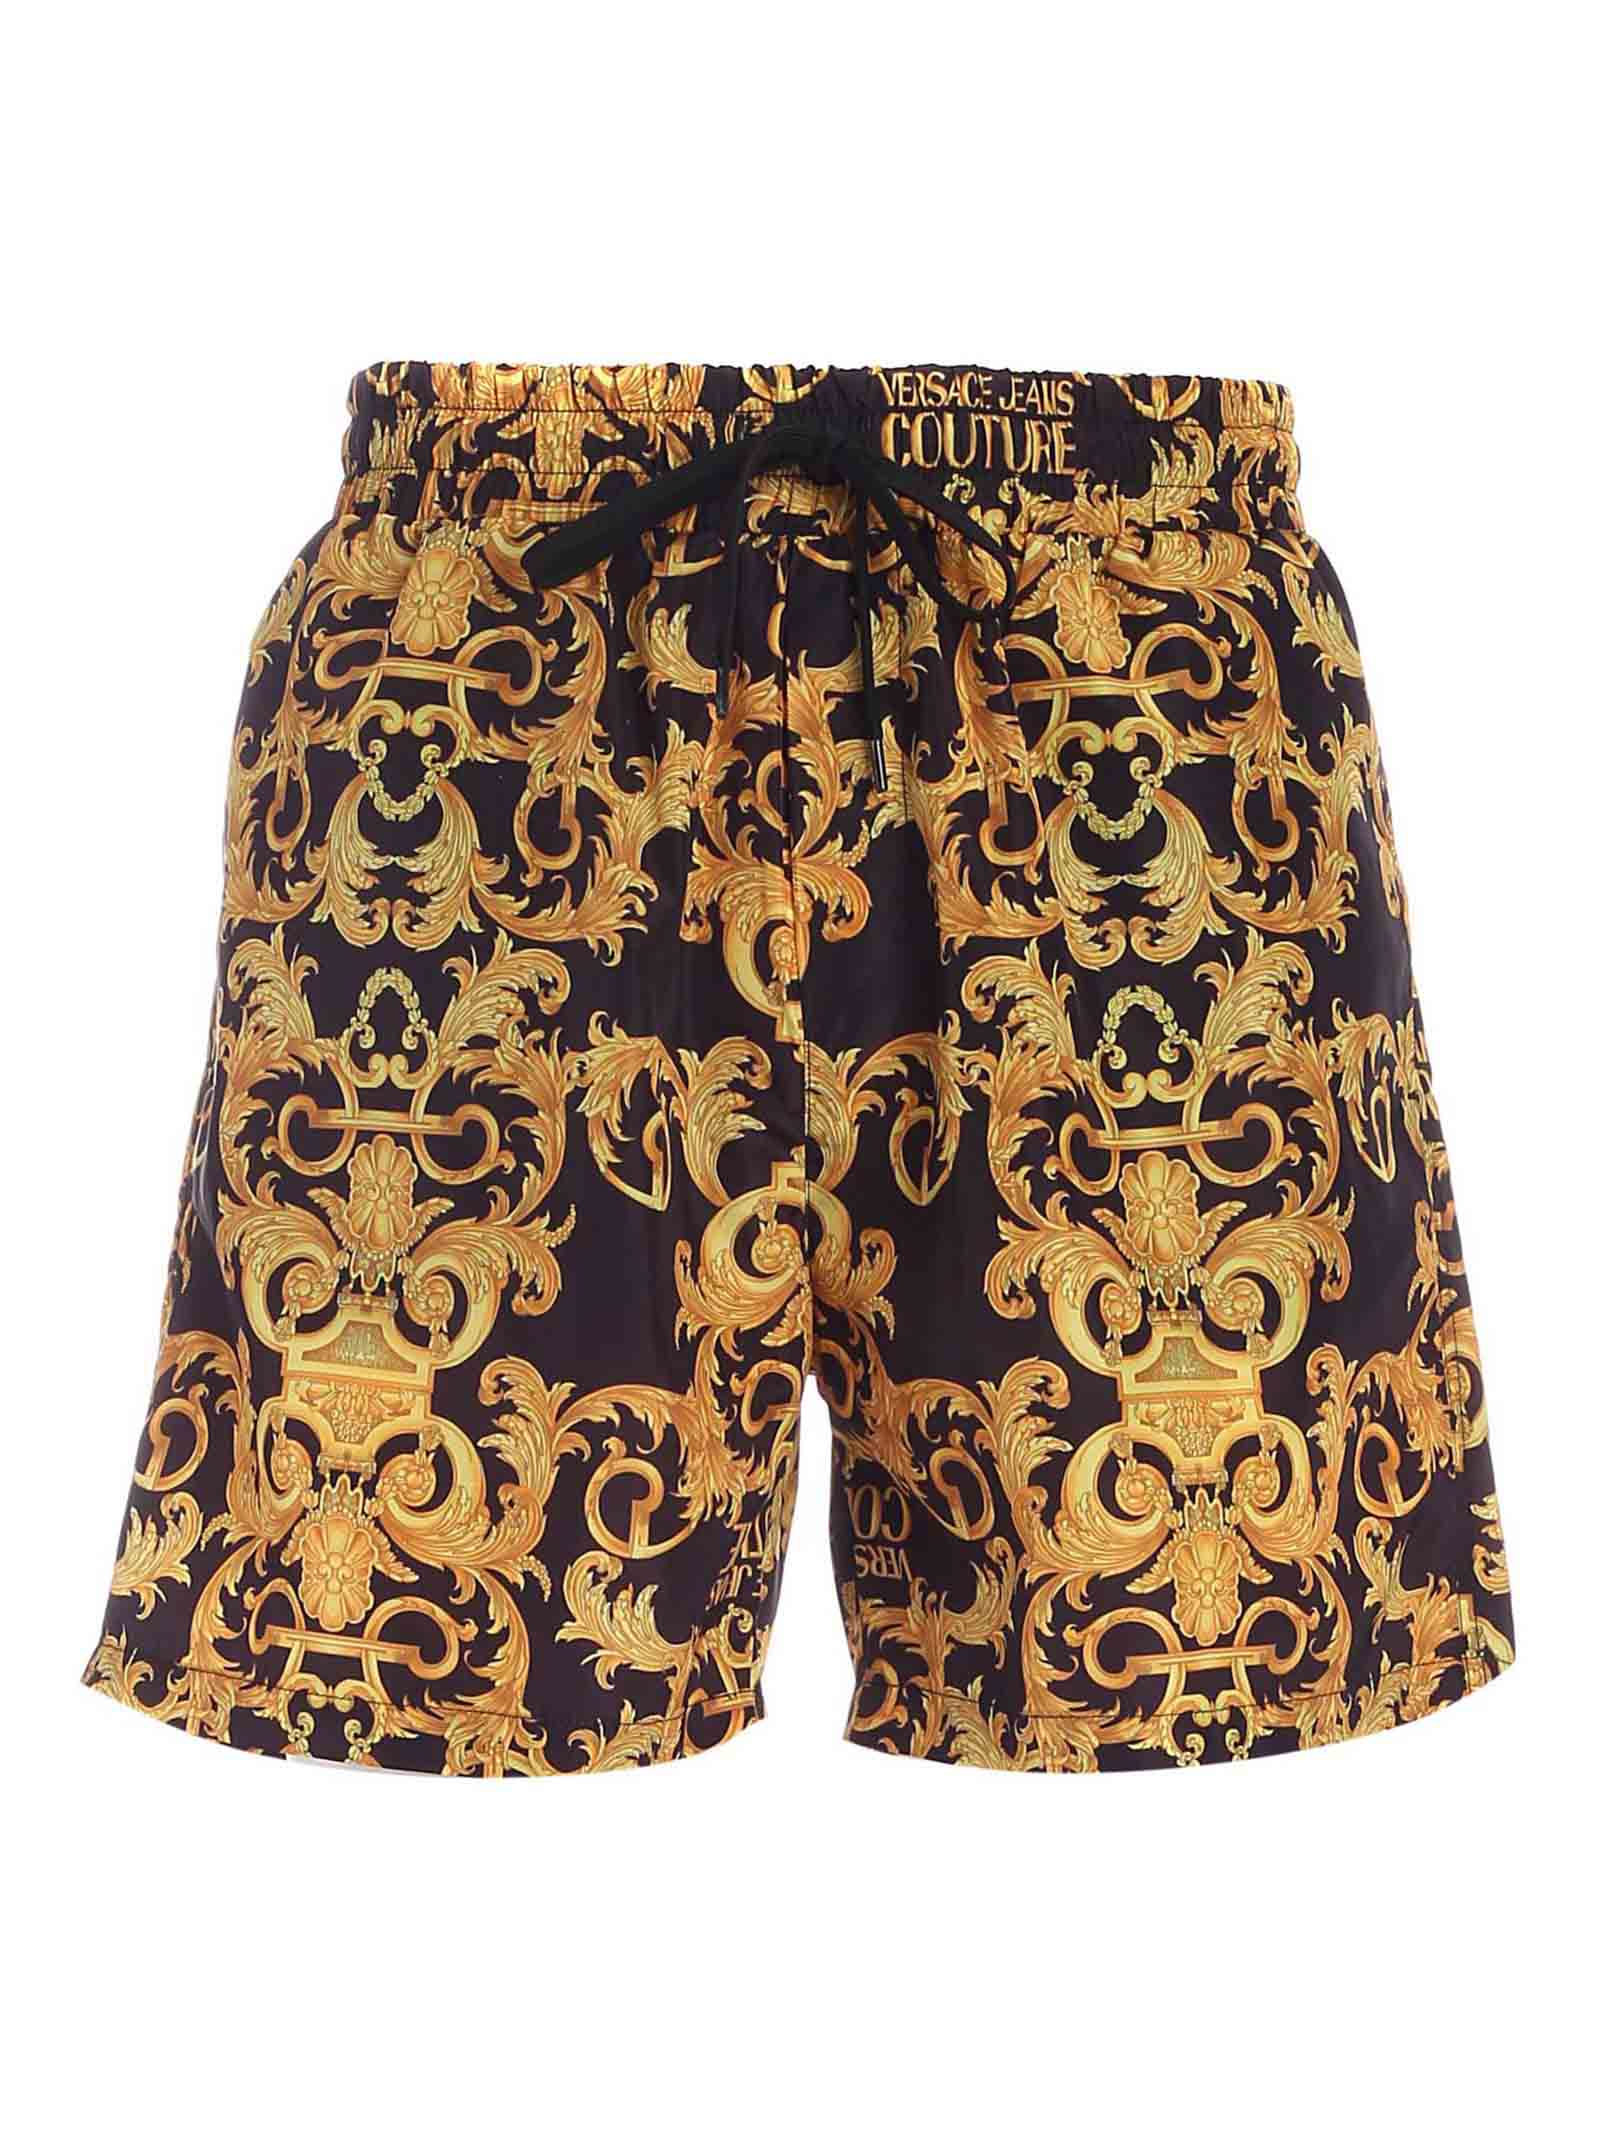 Versace Jeans Couture Baroque Logo Print Swim Trunks In Black